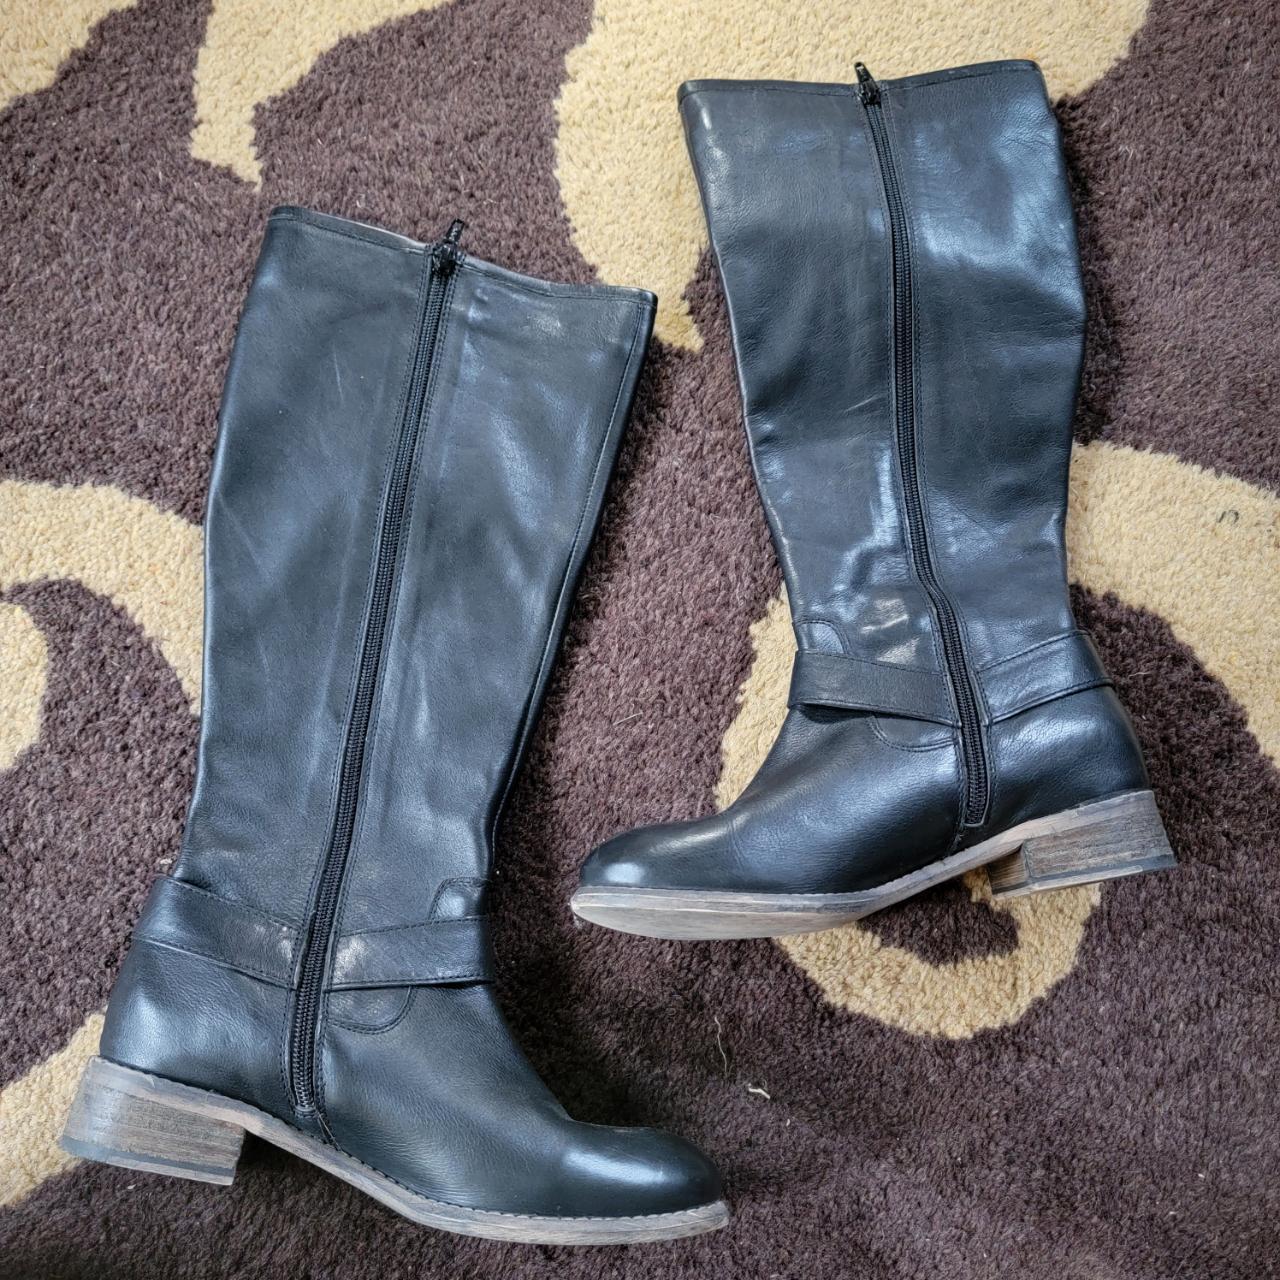 leather knee high boots with ring details 🖤 ~... - Depop